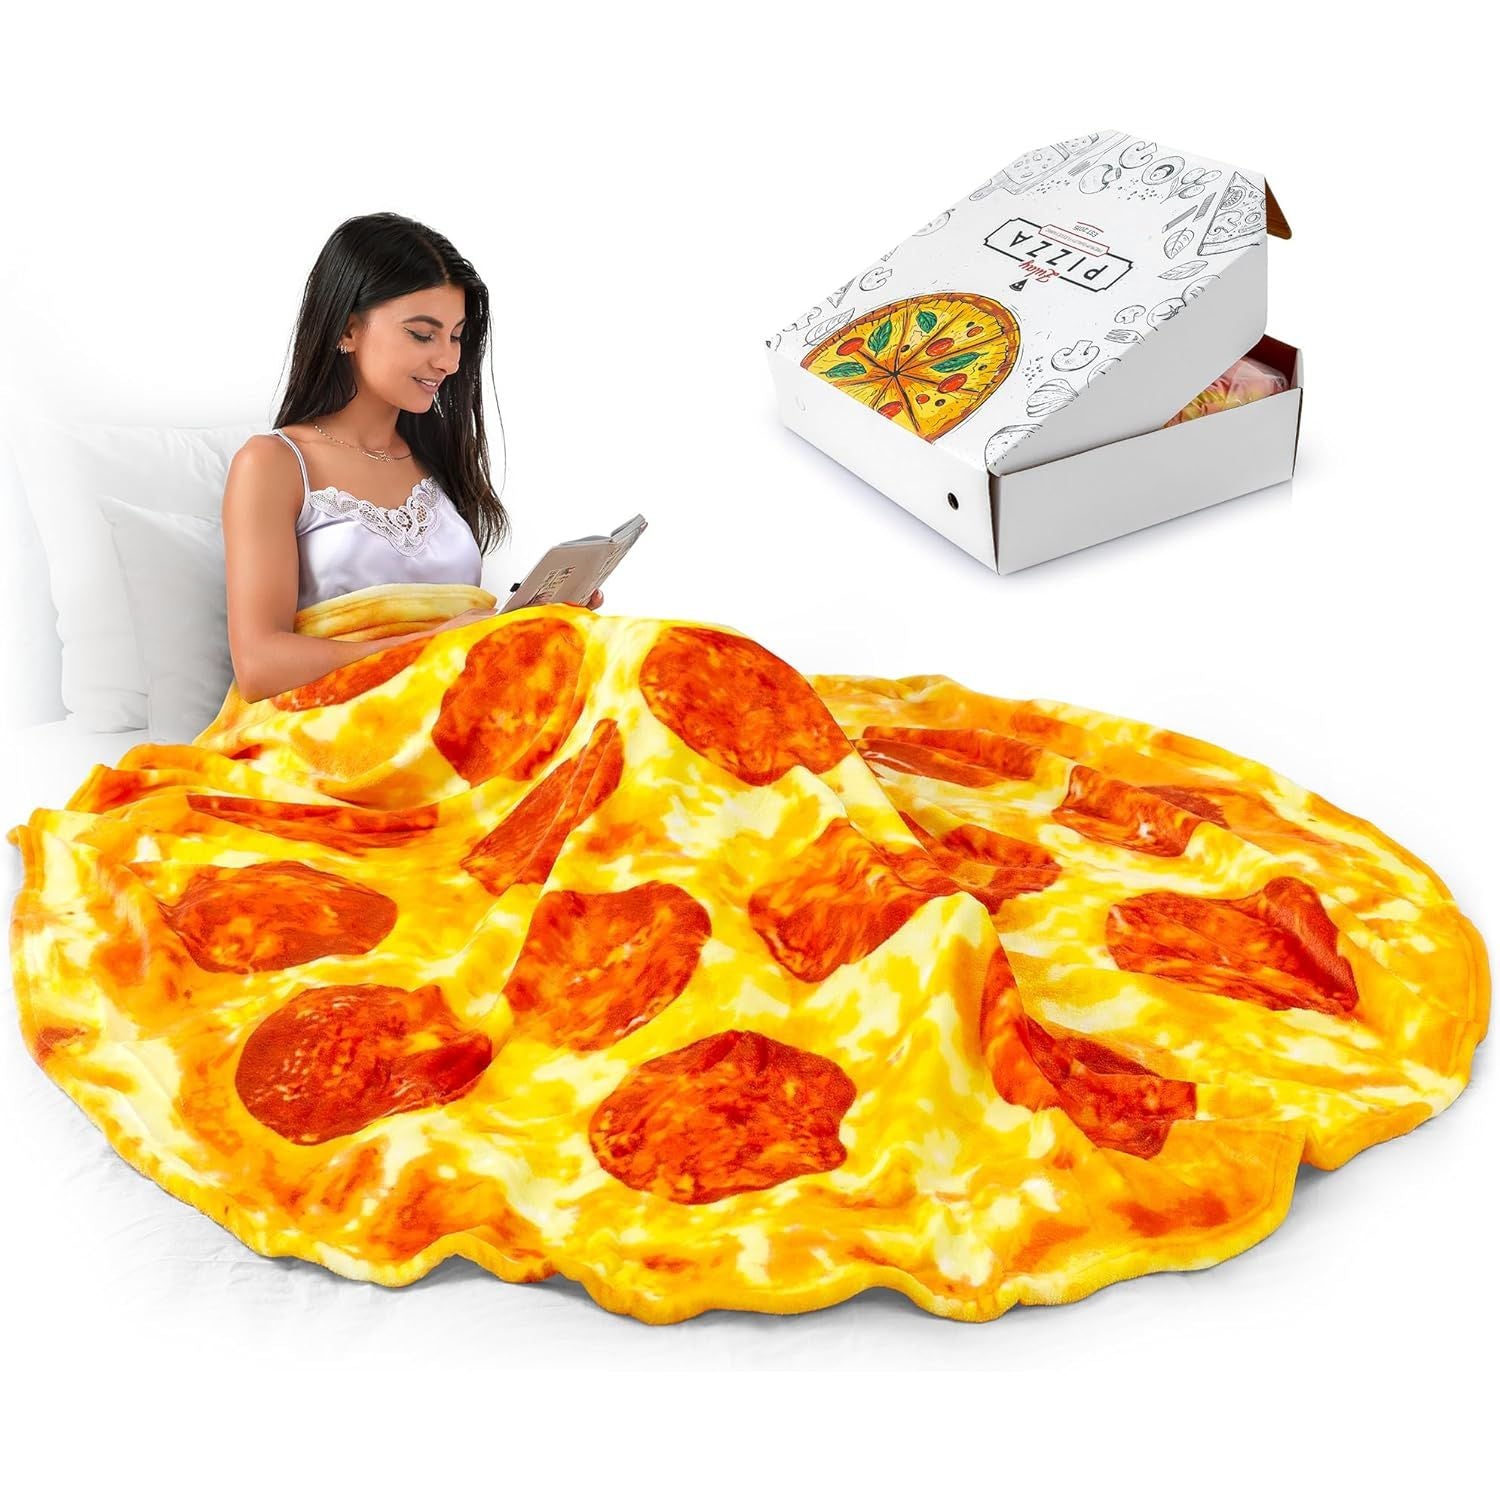 I only want to wrap up in this cozy pepperoni pizza blanket from now on